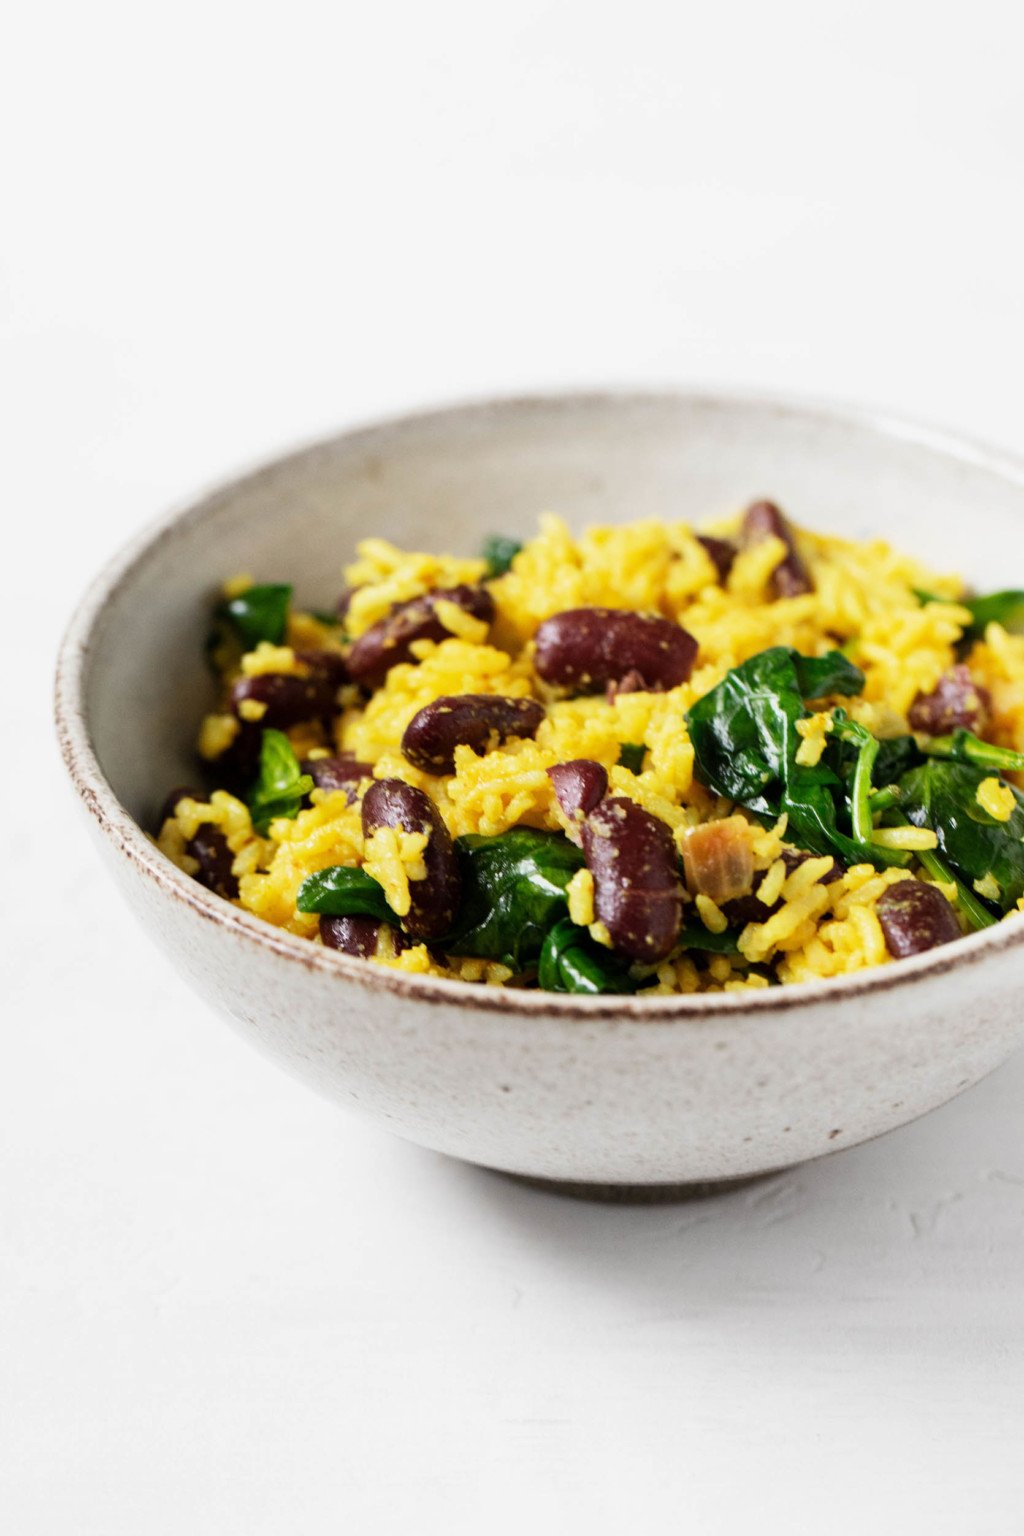 A white serving bowl is filled with a colorful mix of turmeric rice, beans and greens